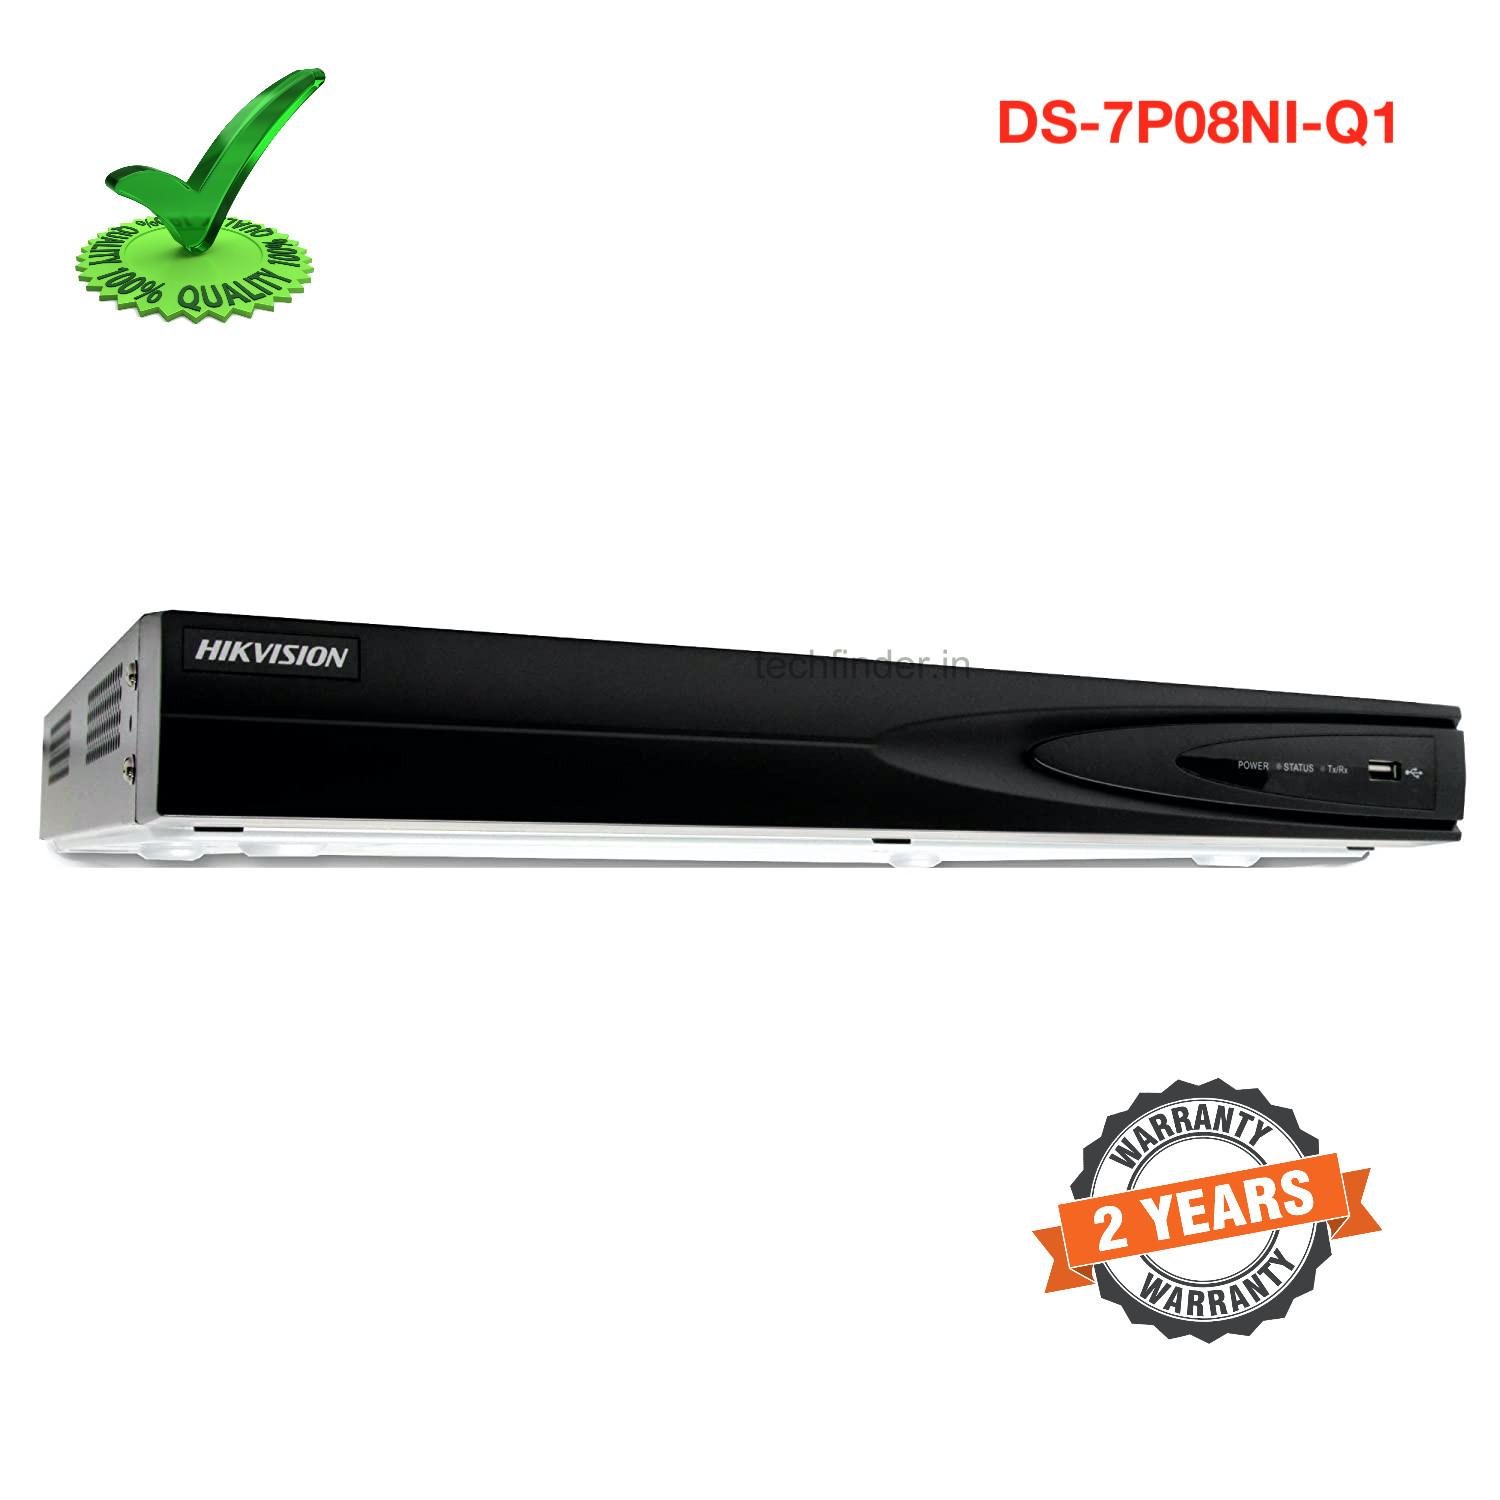 Hikvision DS-7P08NI-Q1 Hdmi 8ch 4k Network Video Recorder 